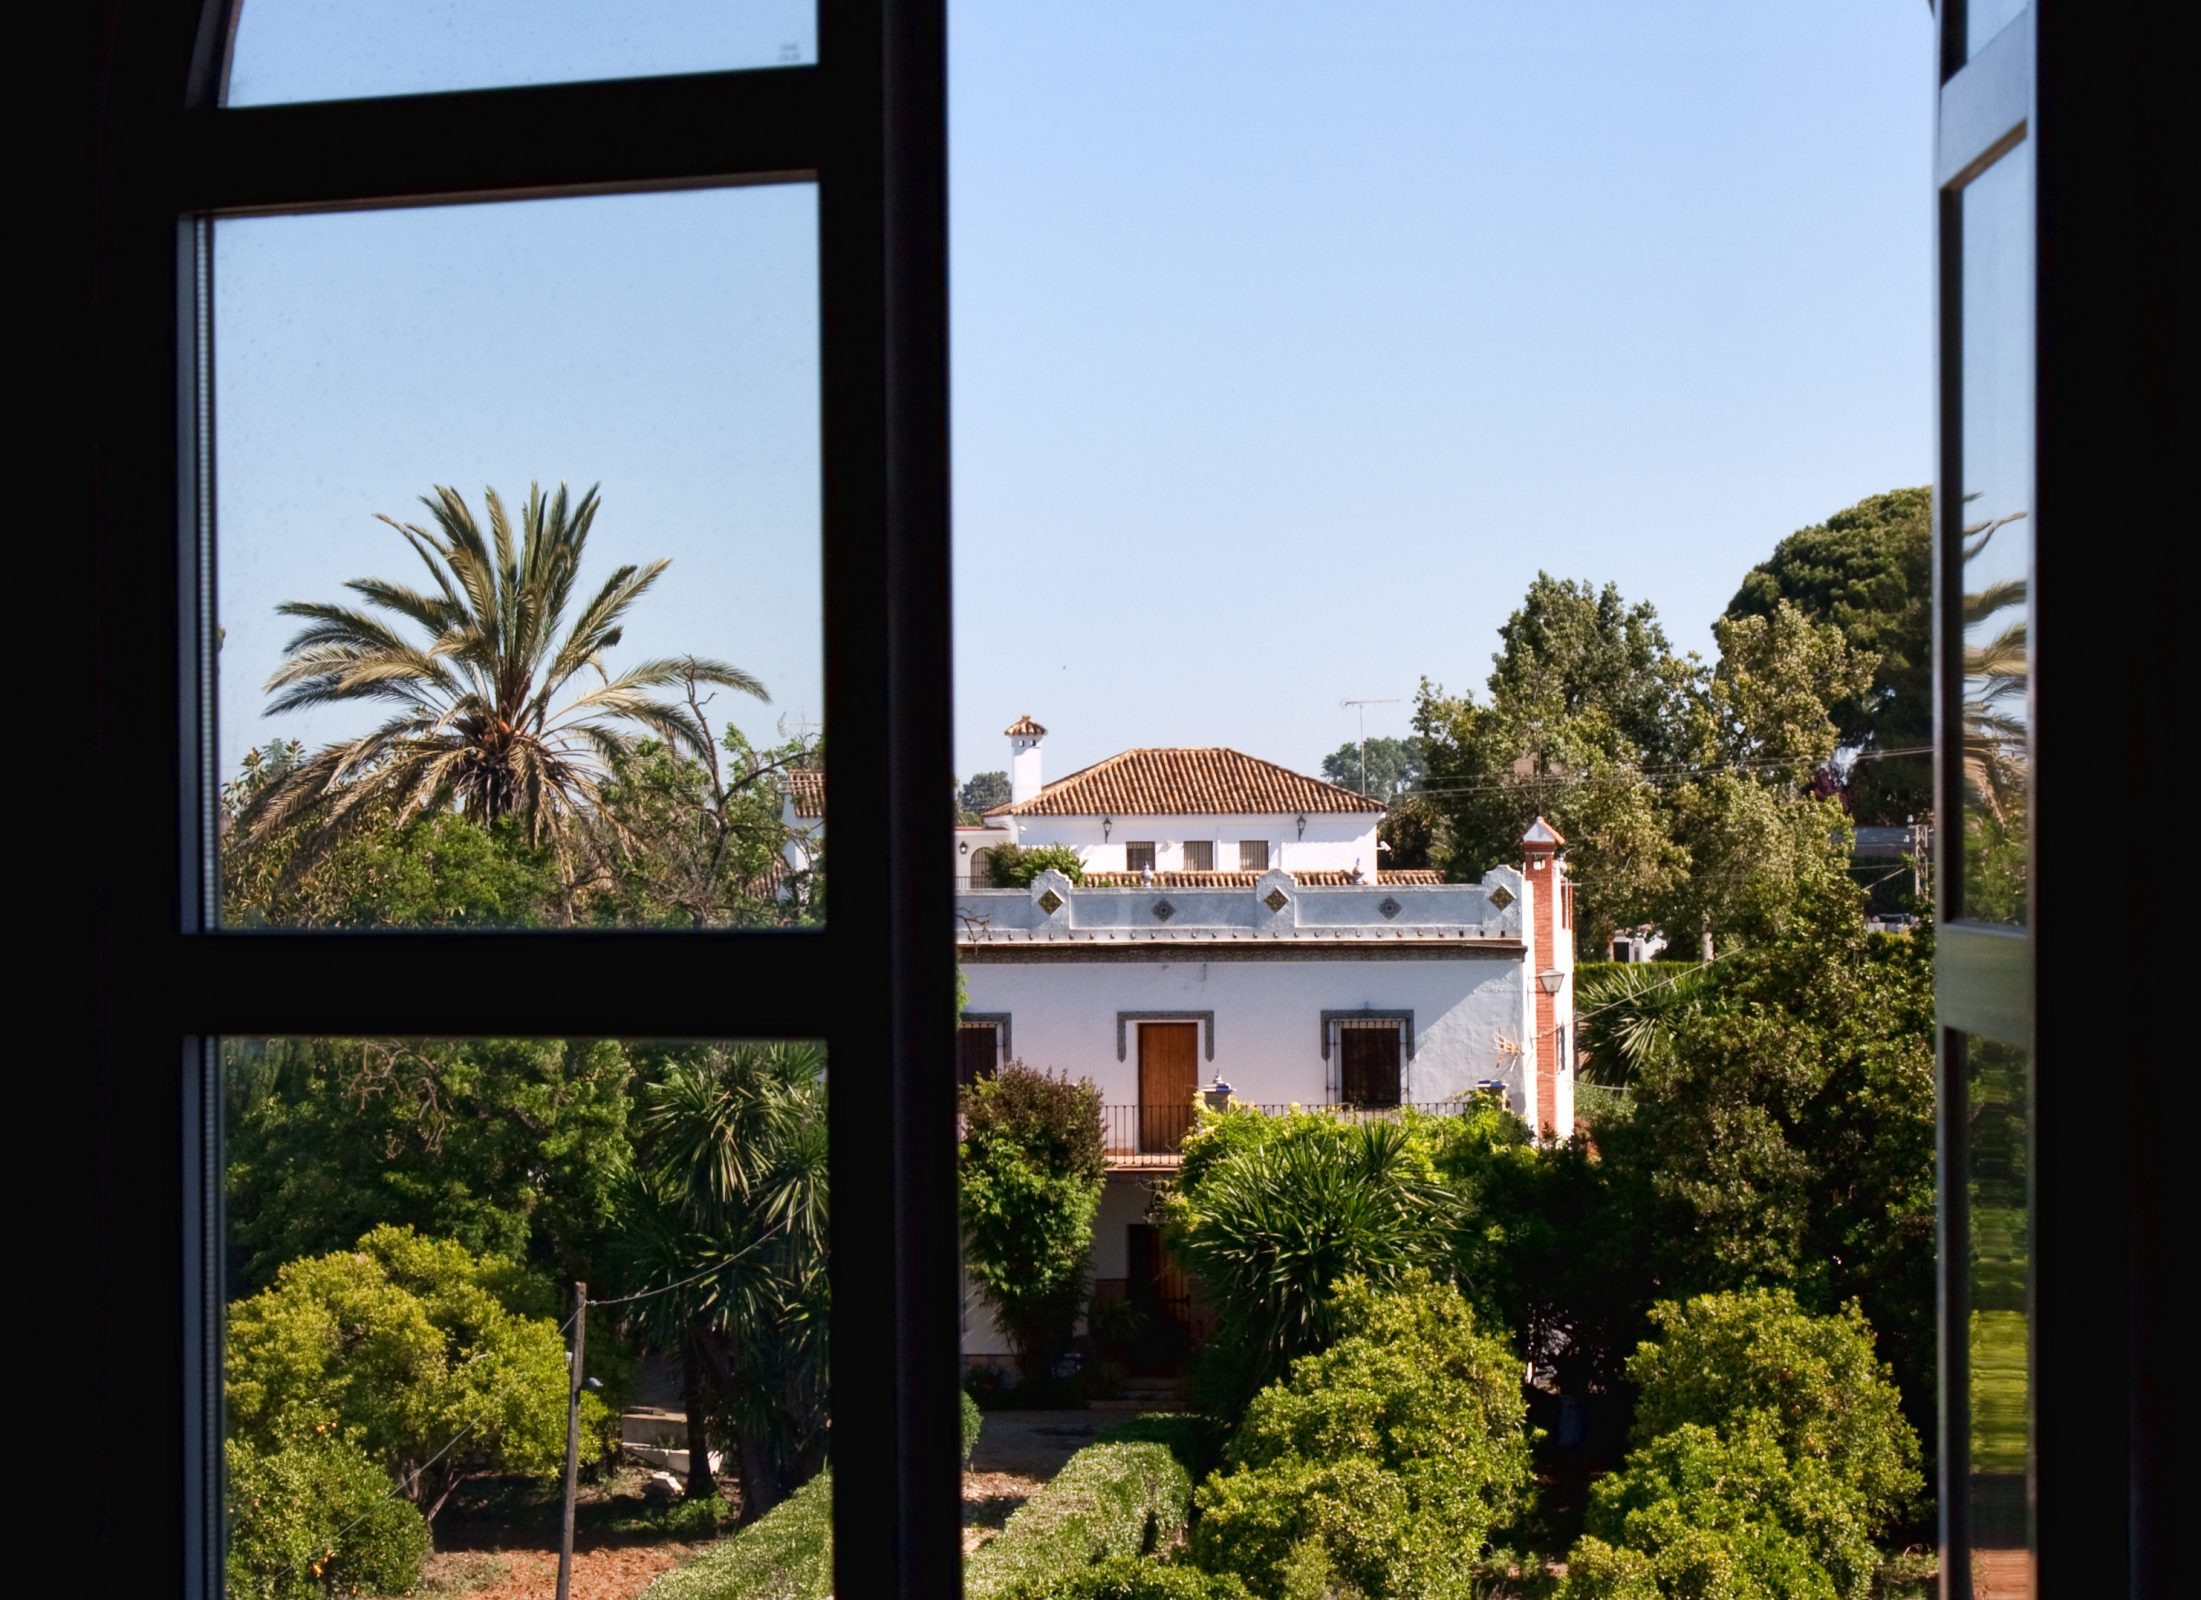 A vindow with a view in Andalusia, Spain